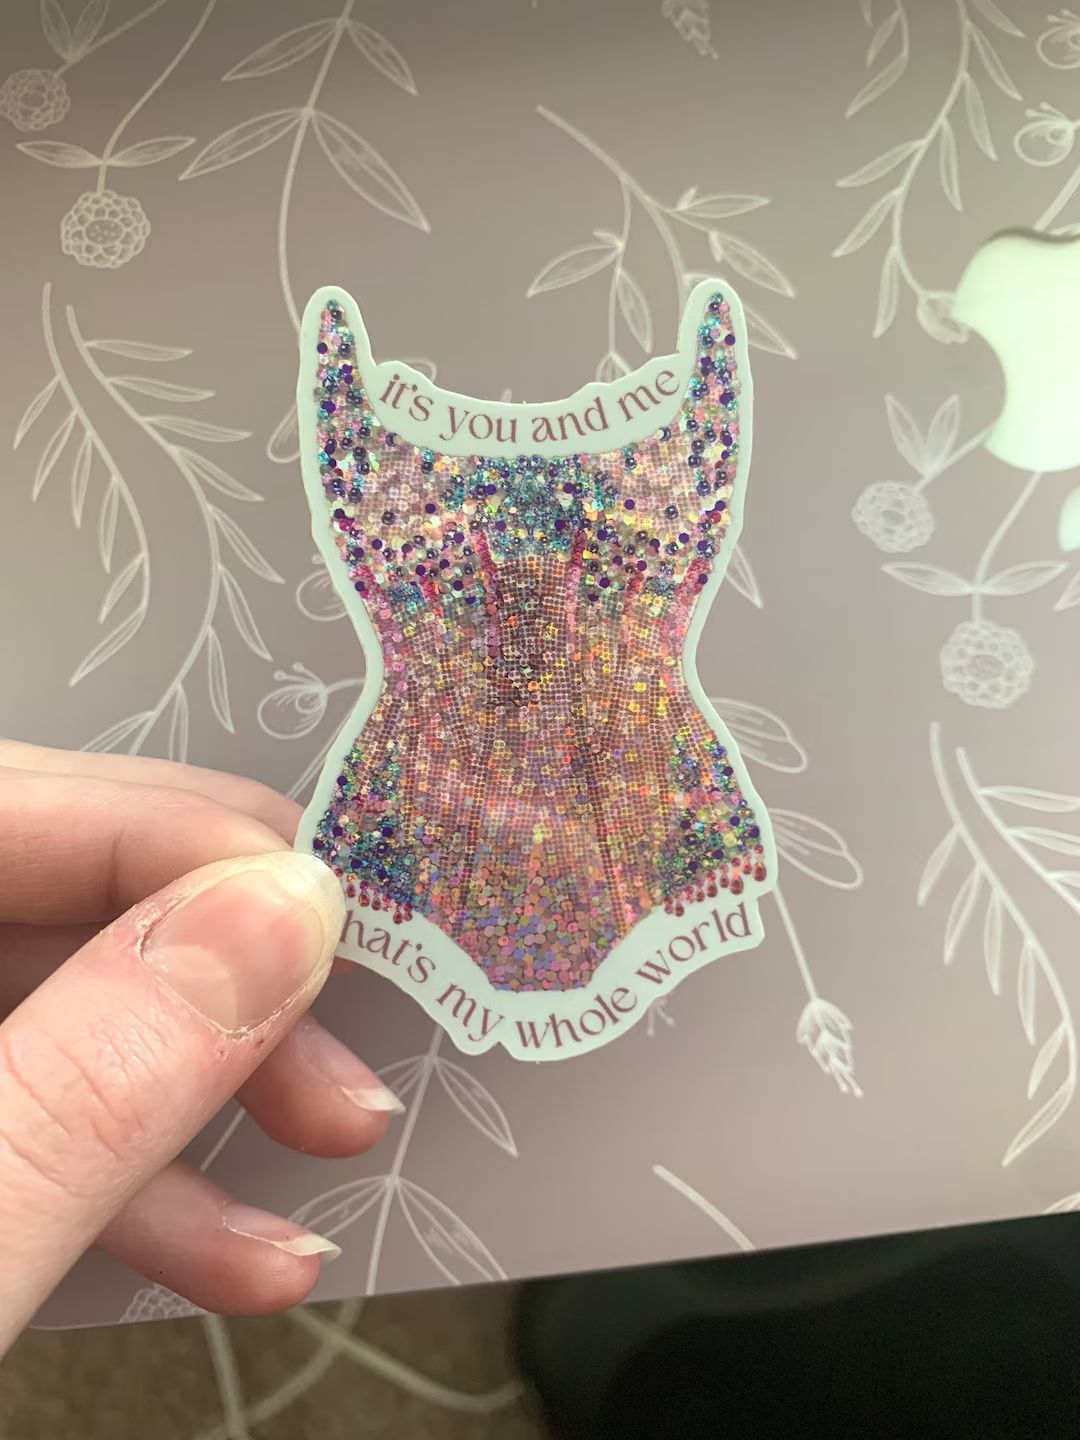 Eras Sparkle Bodysuit Sticker, It's You and Me, That's My Whole World Opening Song Tour Sticker | Etsy (US)